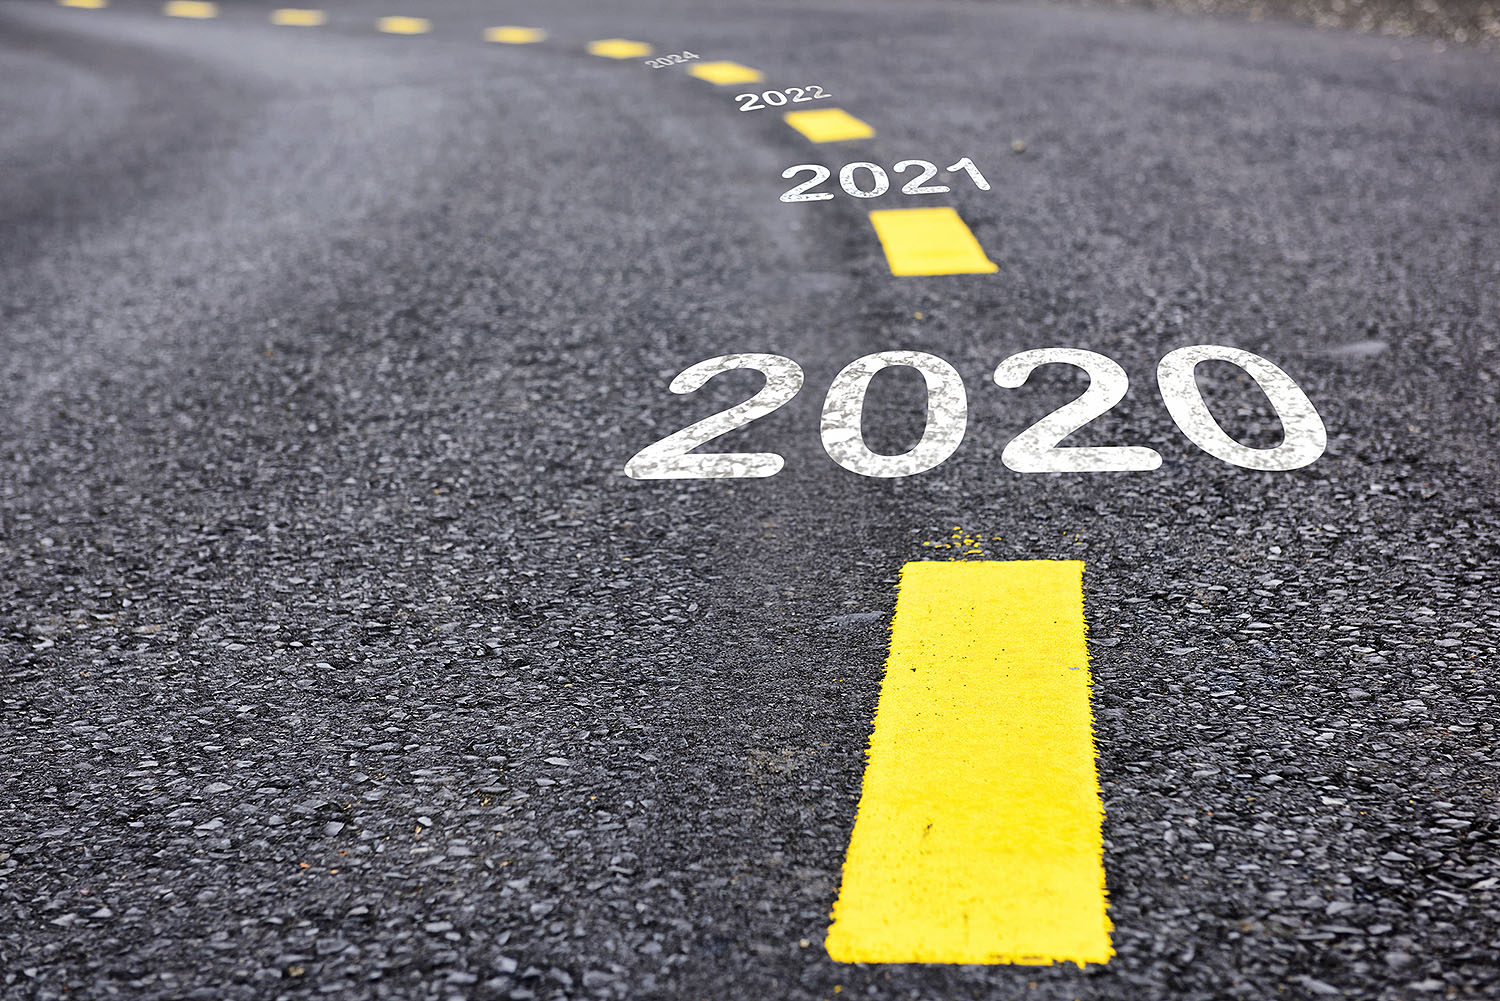 2020 Events Business to Slow at Year-end, Rebound in 2021 ...